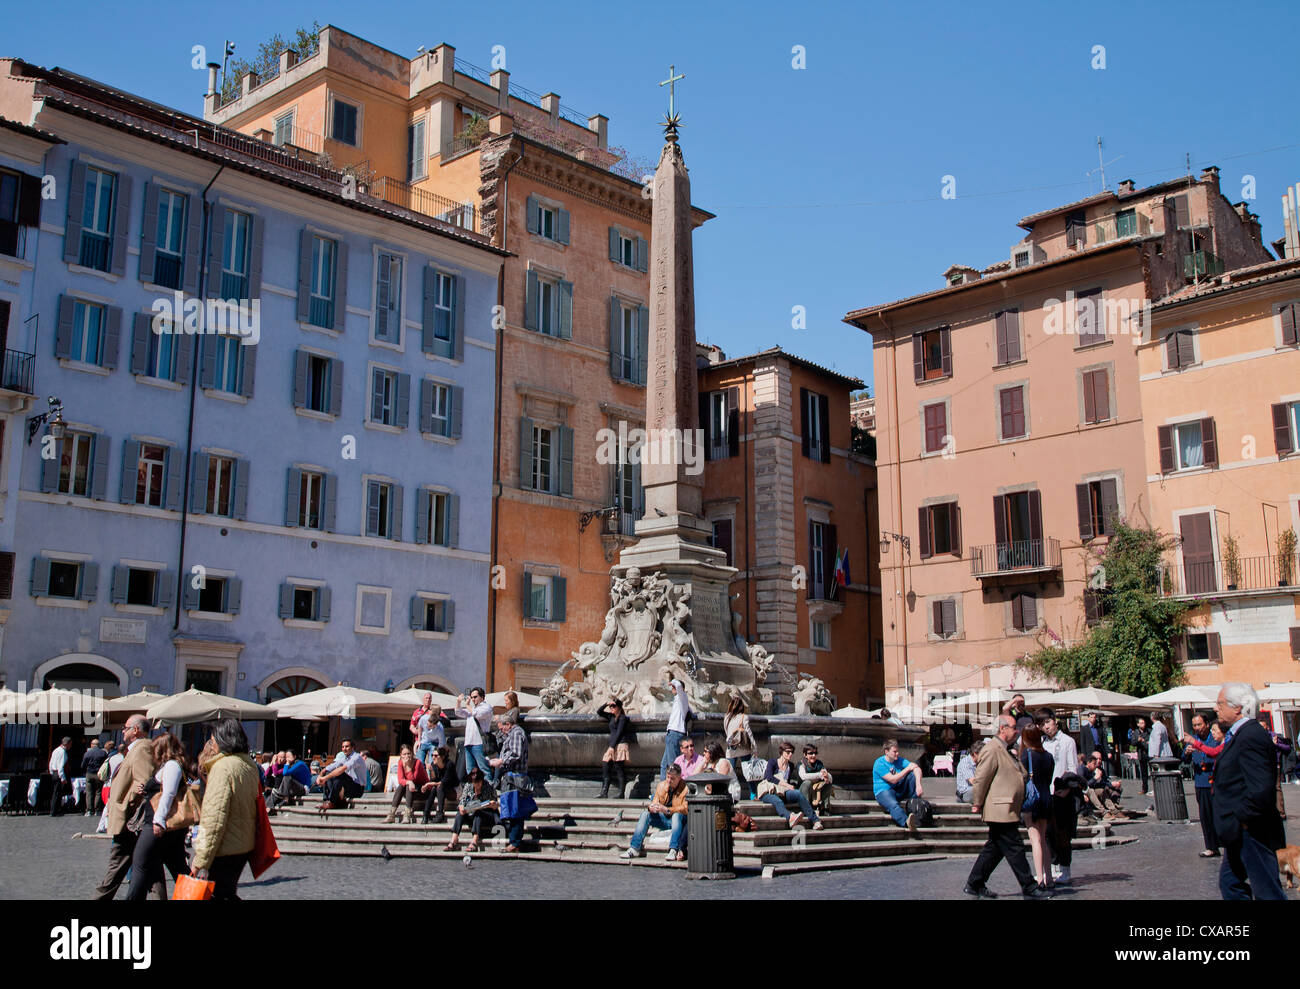 Fountain of the Pantheon (Fontana del Pantheon) in the Piazza della Rotonda in front of the Roman Pantheon, Rome, Lazio, Italy Stock Photo